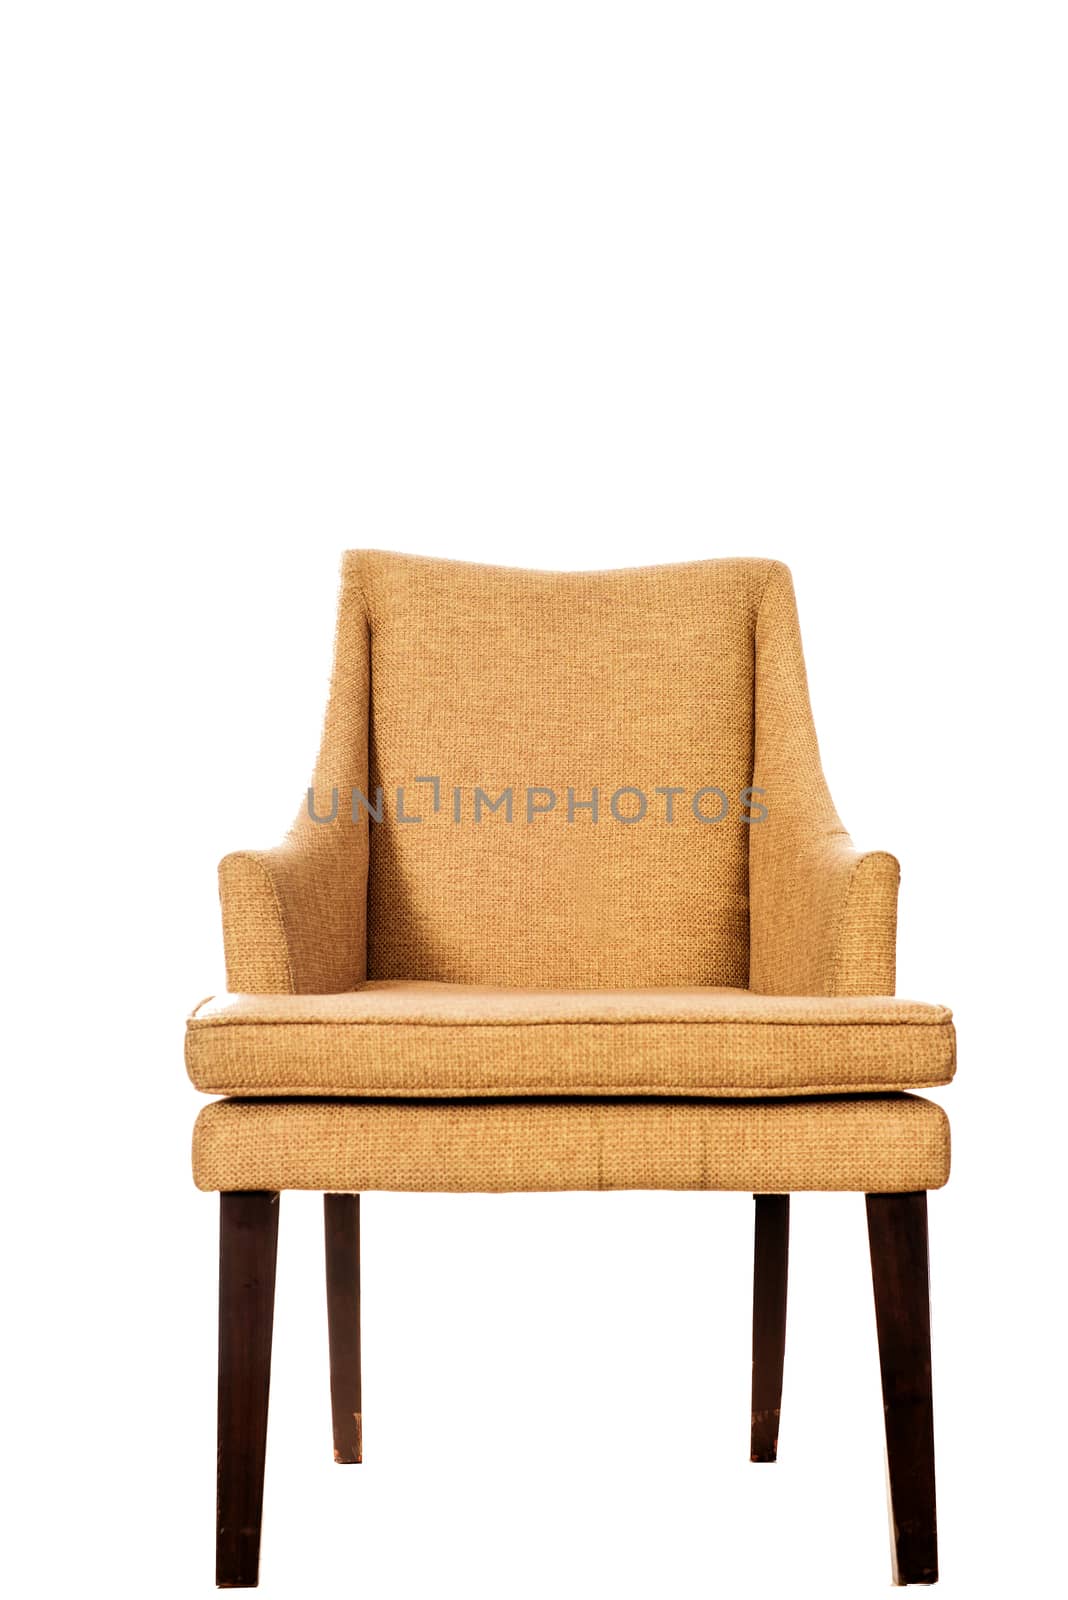 Wooden brown Chair Isolated on White